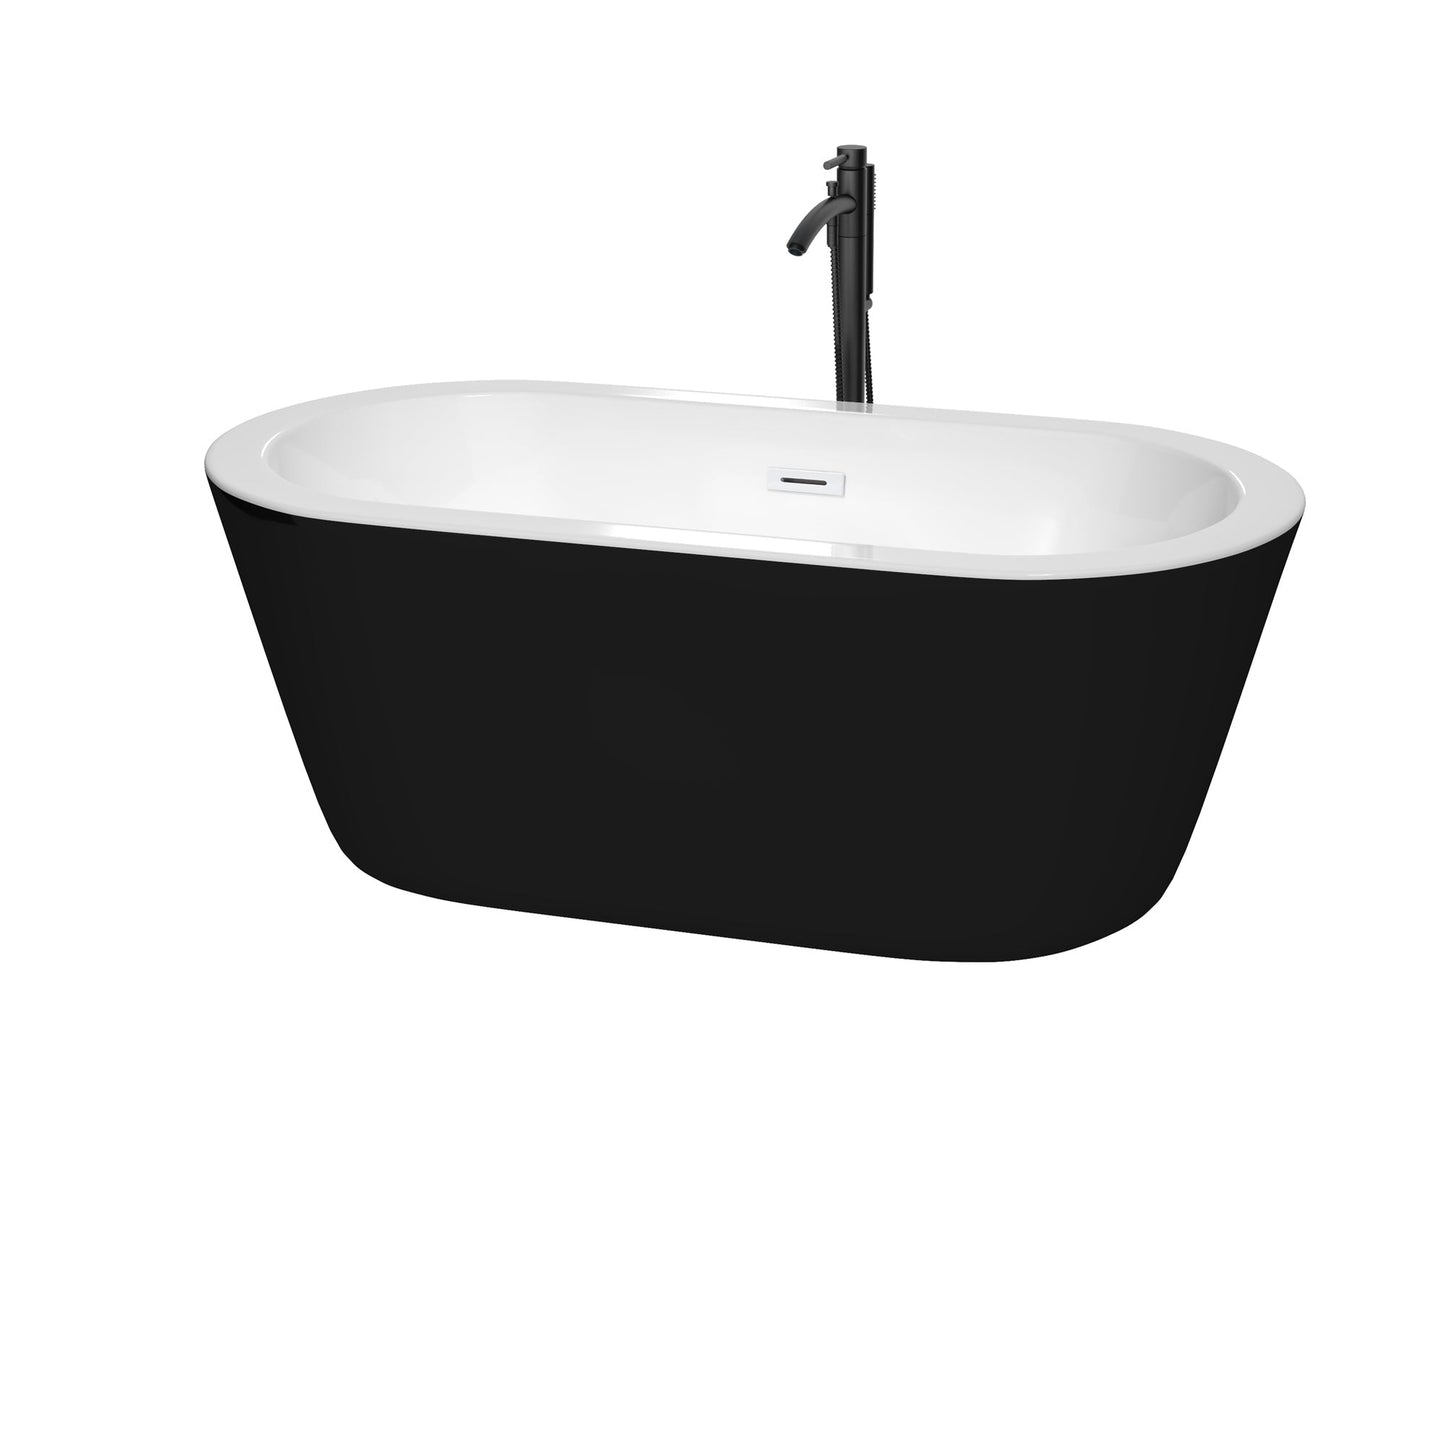 Wyndham Collection Mermaid 60" Freestanding Bathtub in Black With White Interior With Shiny White Trim and Floor Mounted Faucet in Matte Black